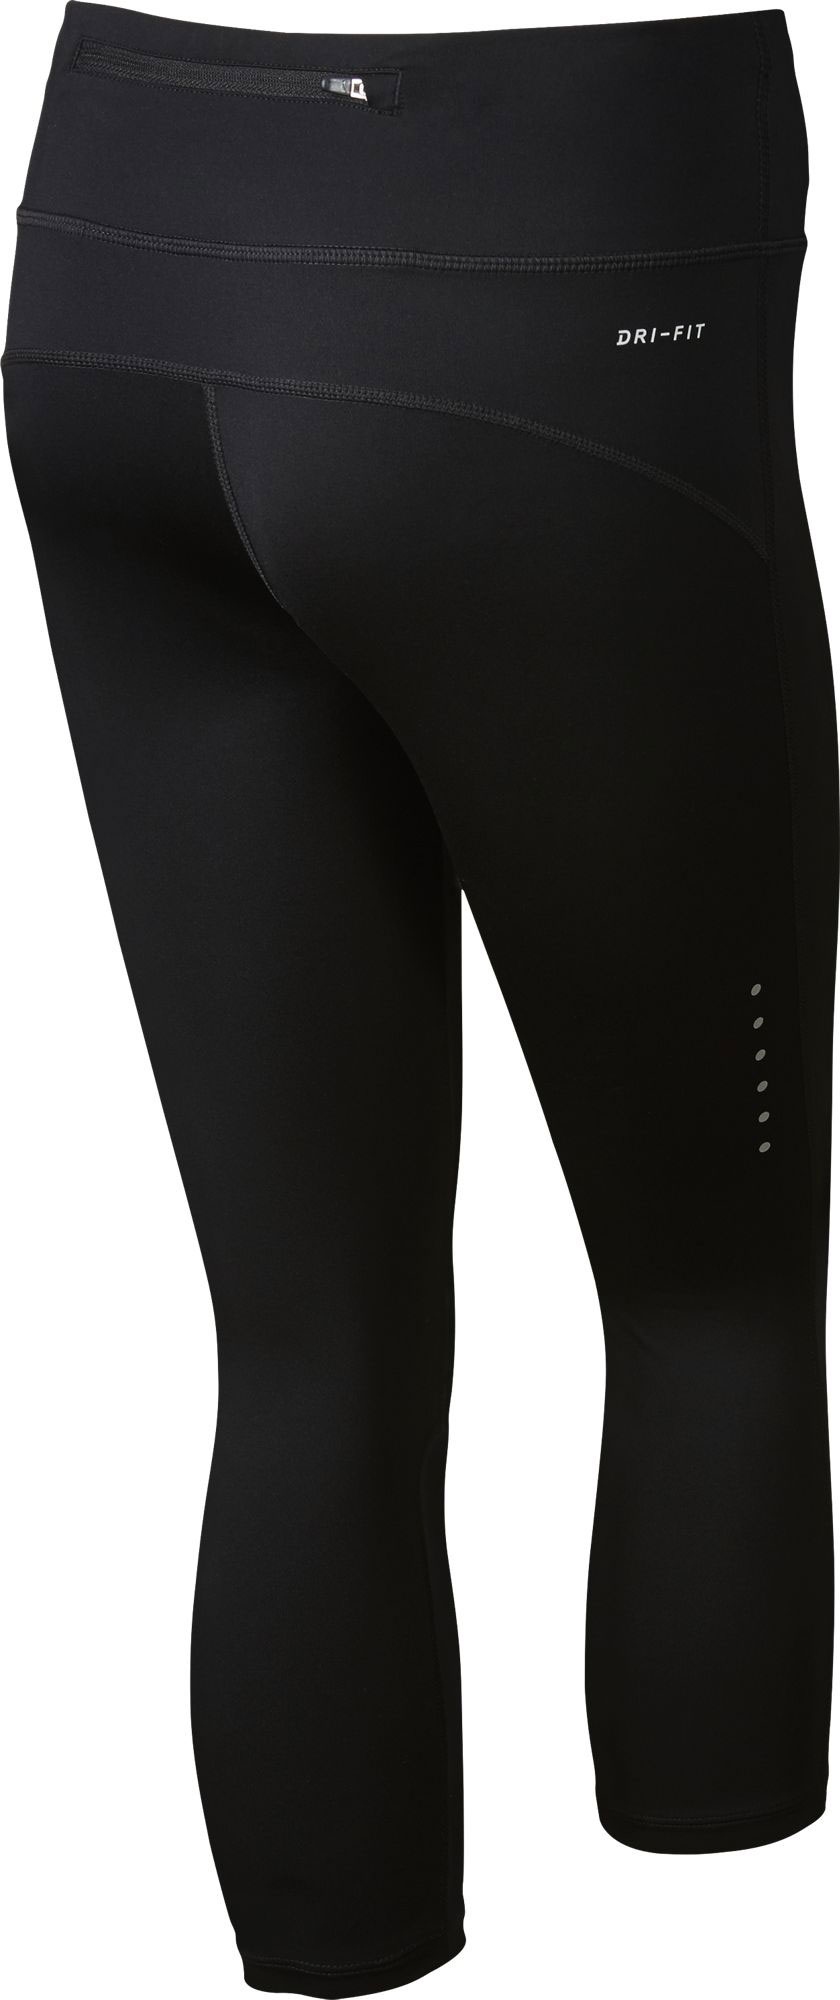 Women’s sports 3/4 length tights